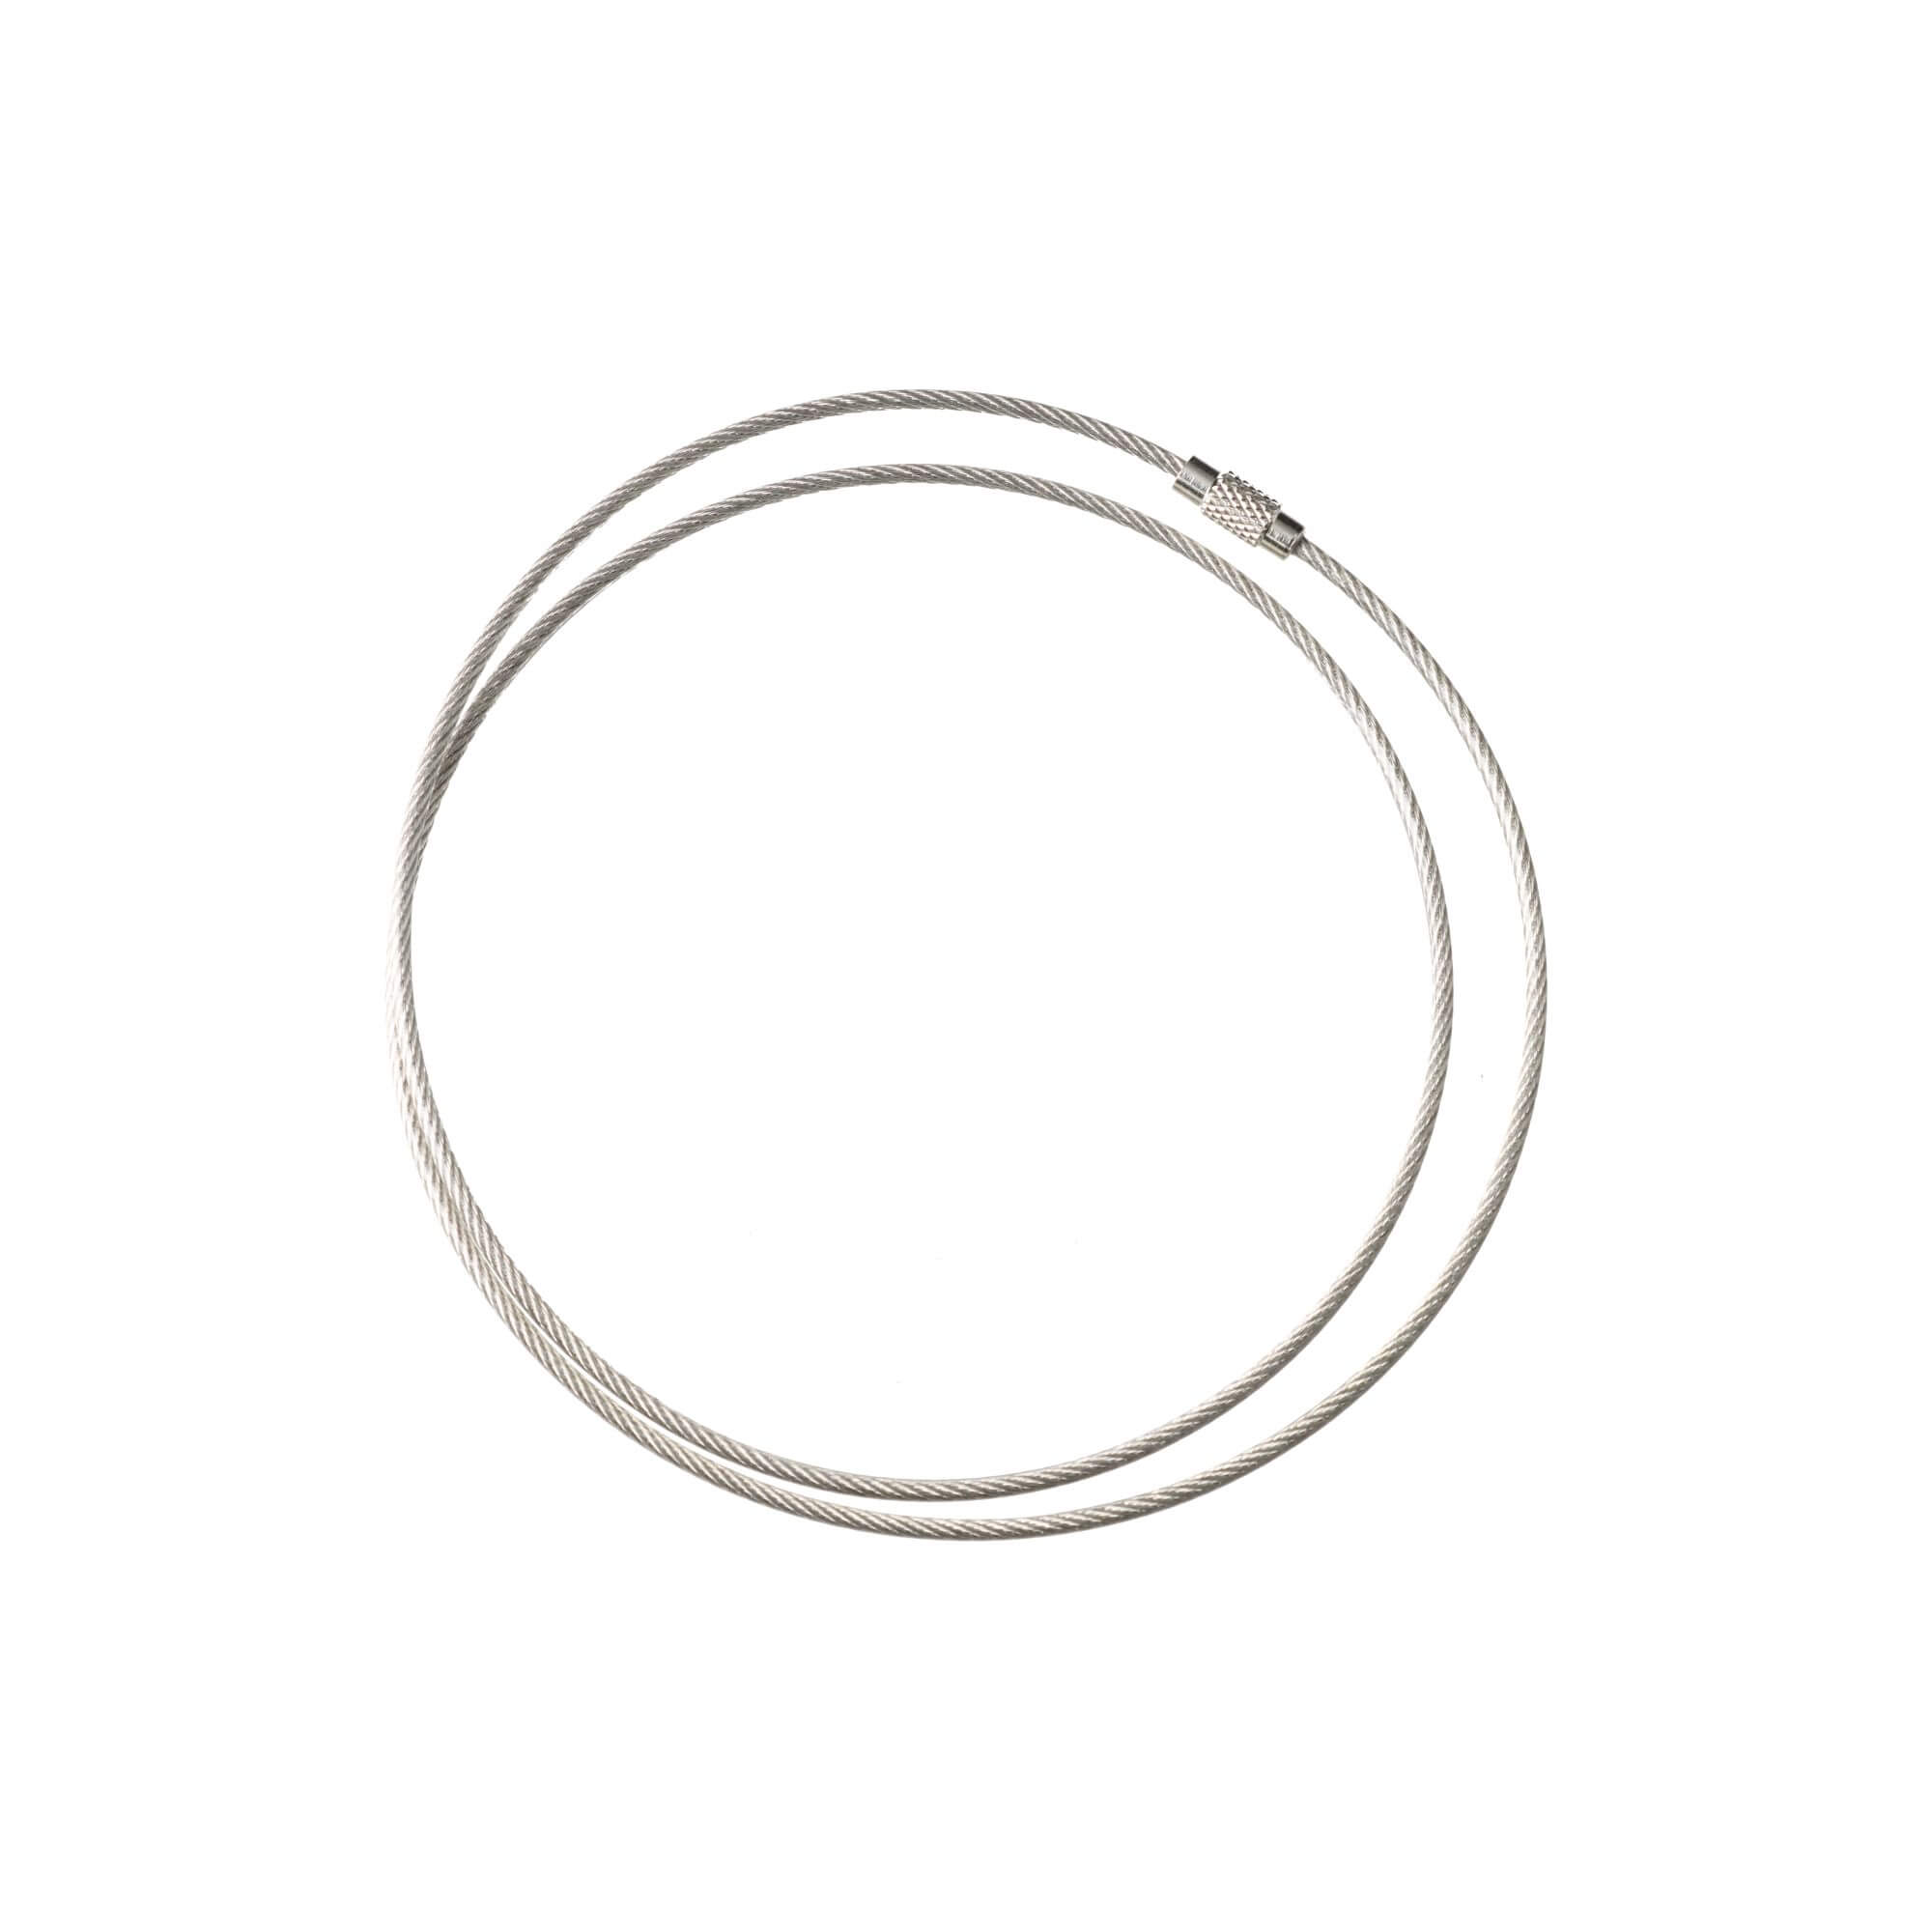 Wire rope for sample book binding Ø200mm 1mm/2mm x 630mm stainless steel transparent PVC sheath